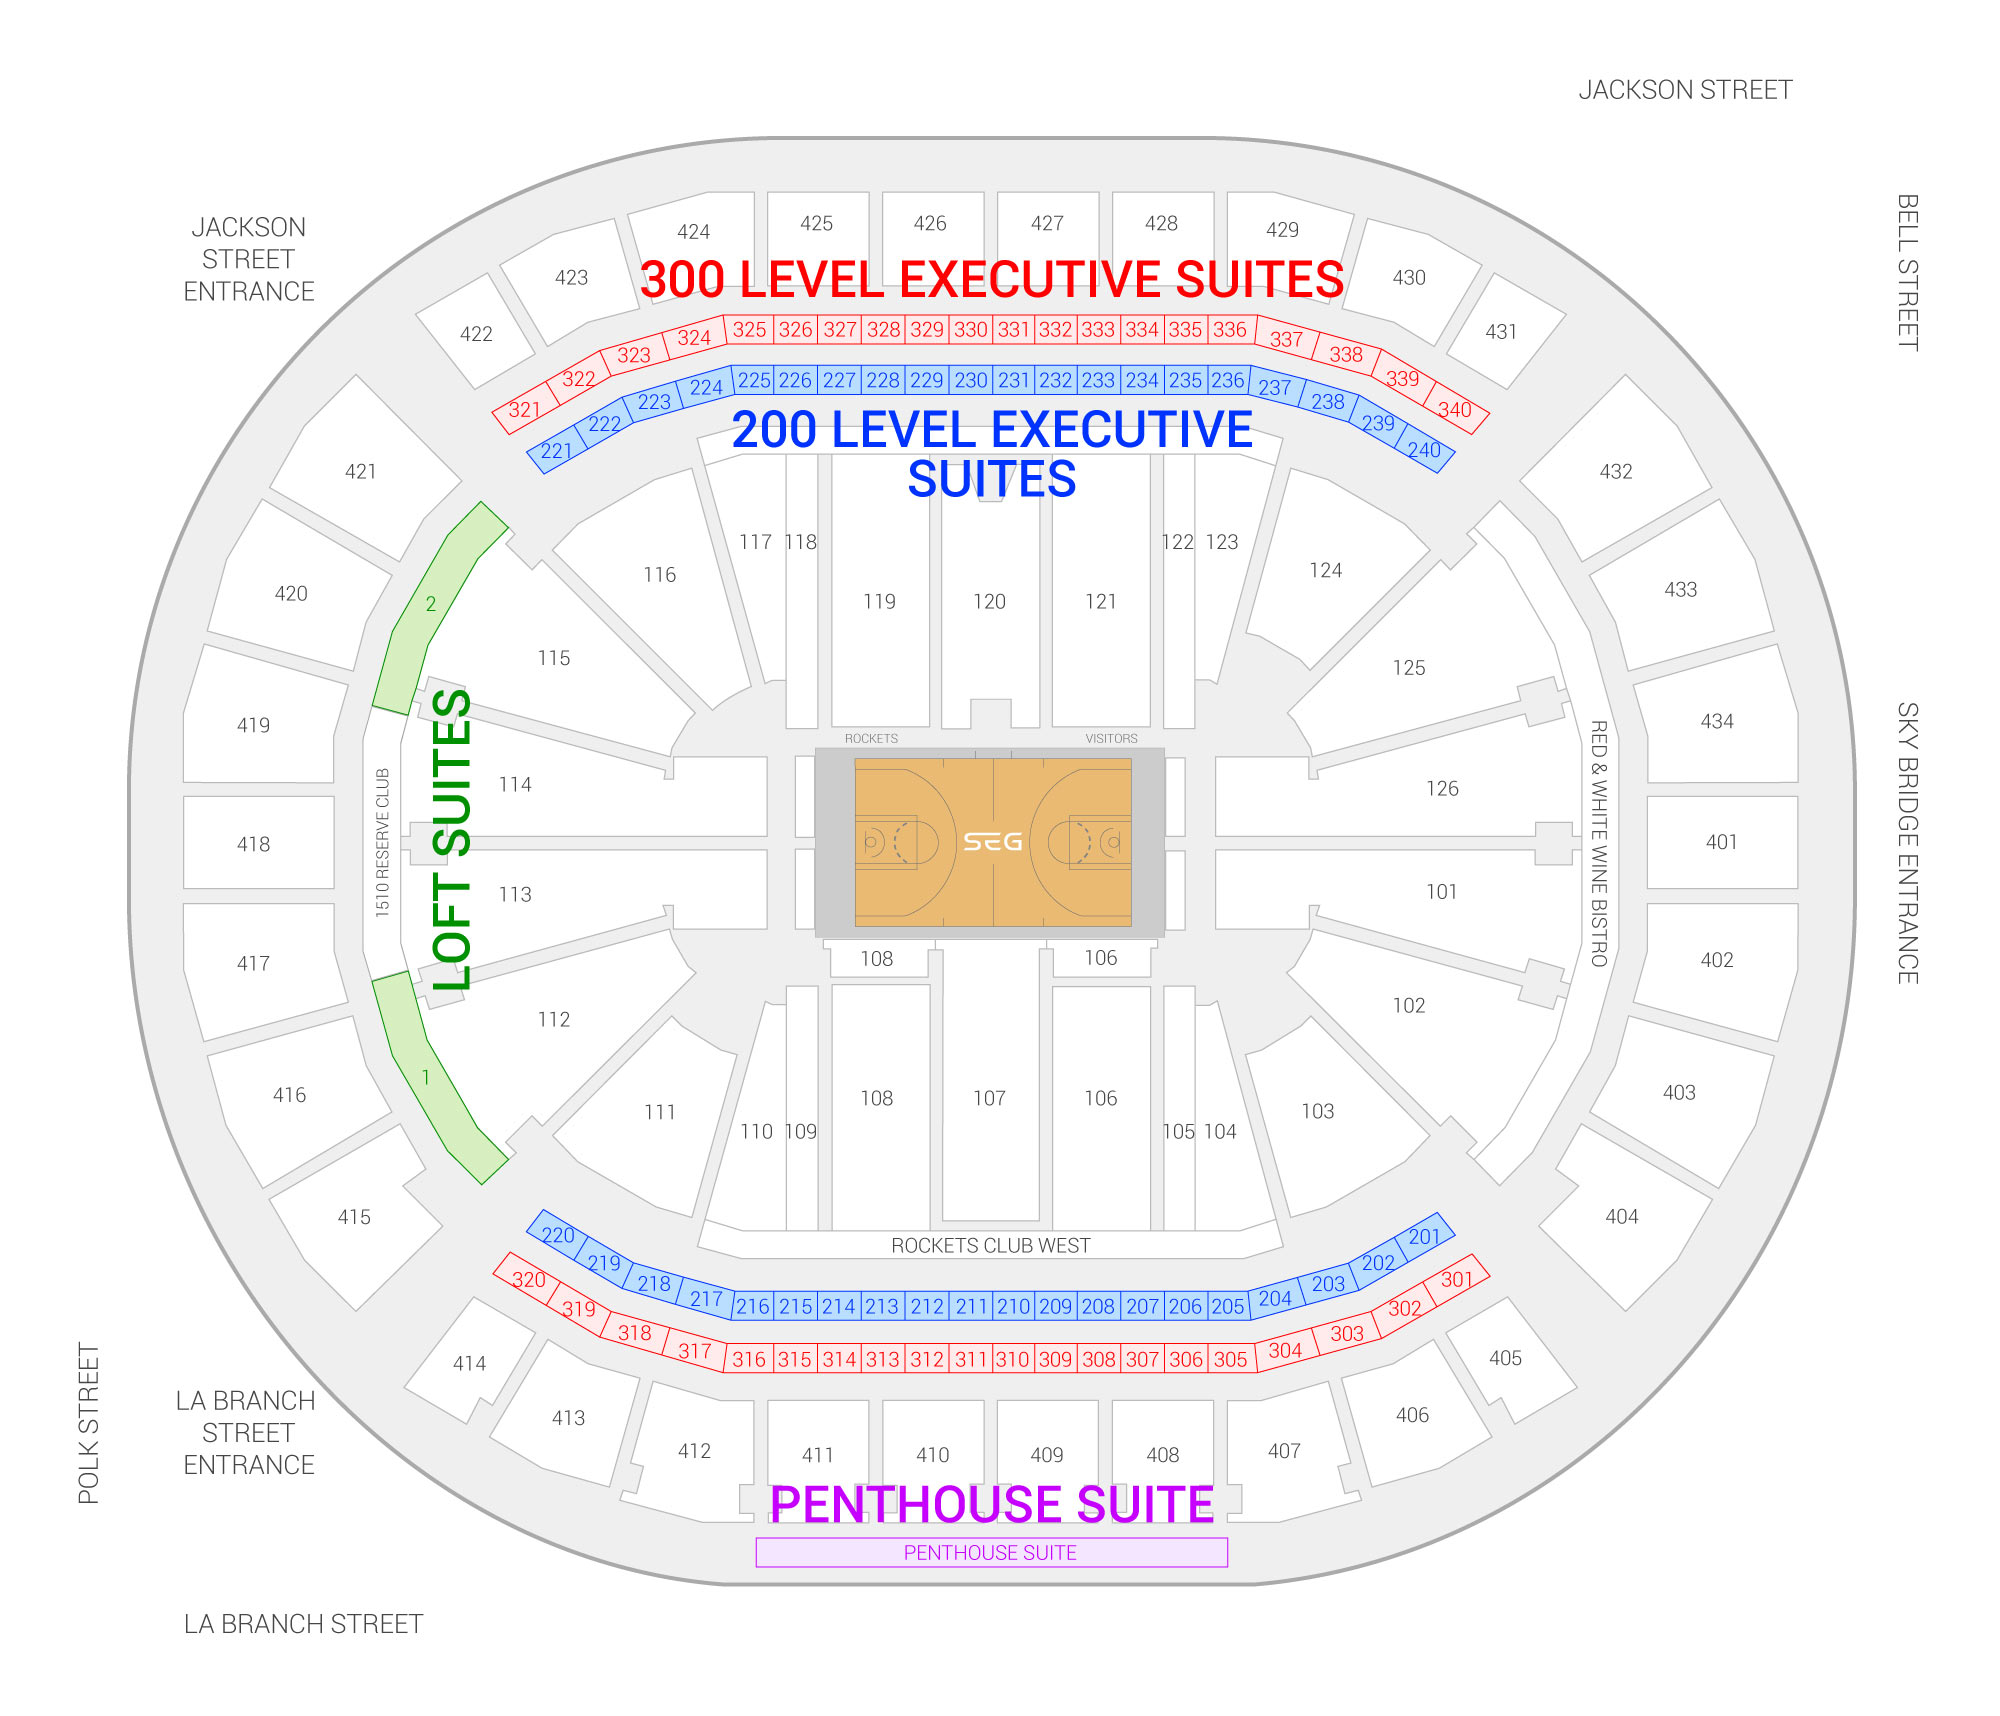 Toyota Center / Houston Rockets Suite Map and Seating Chart